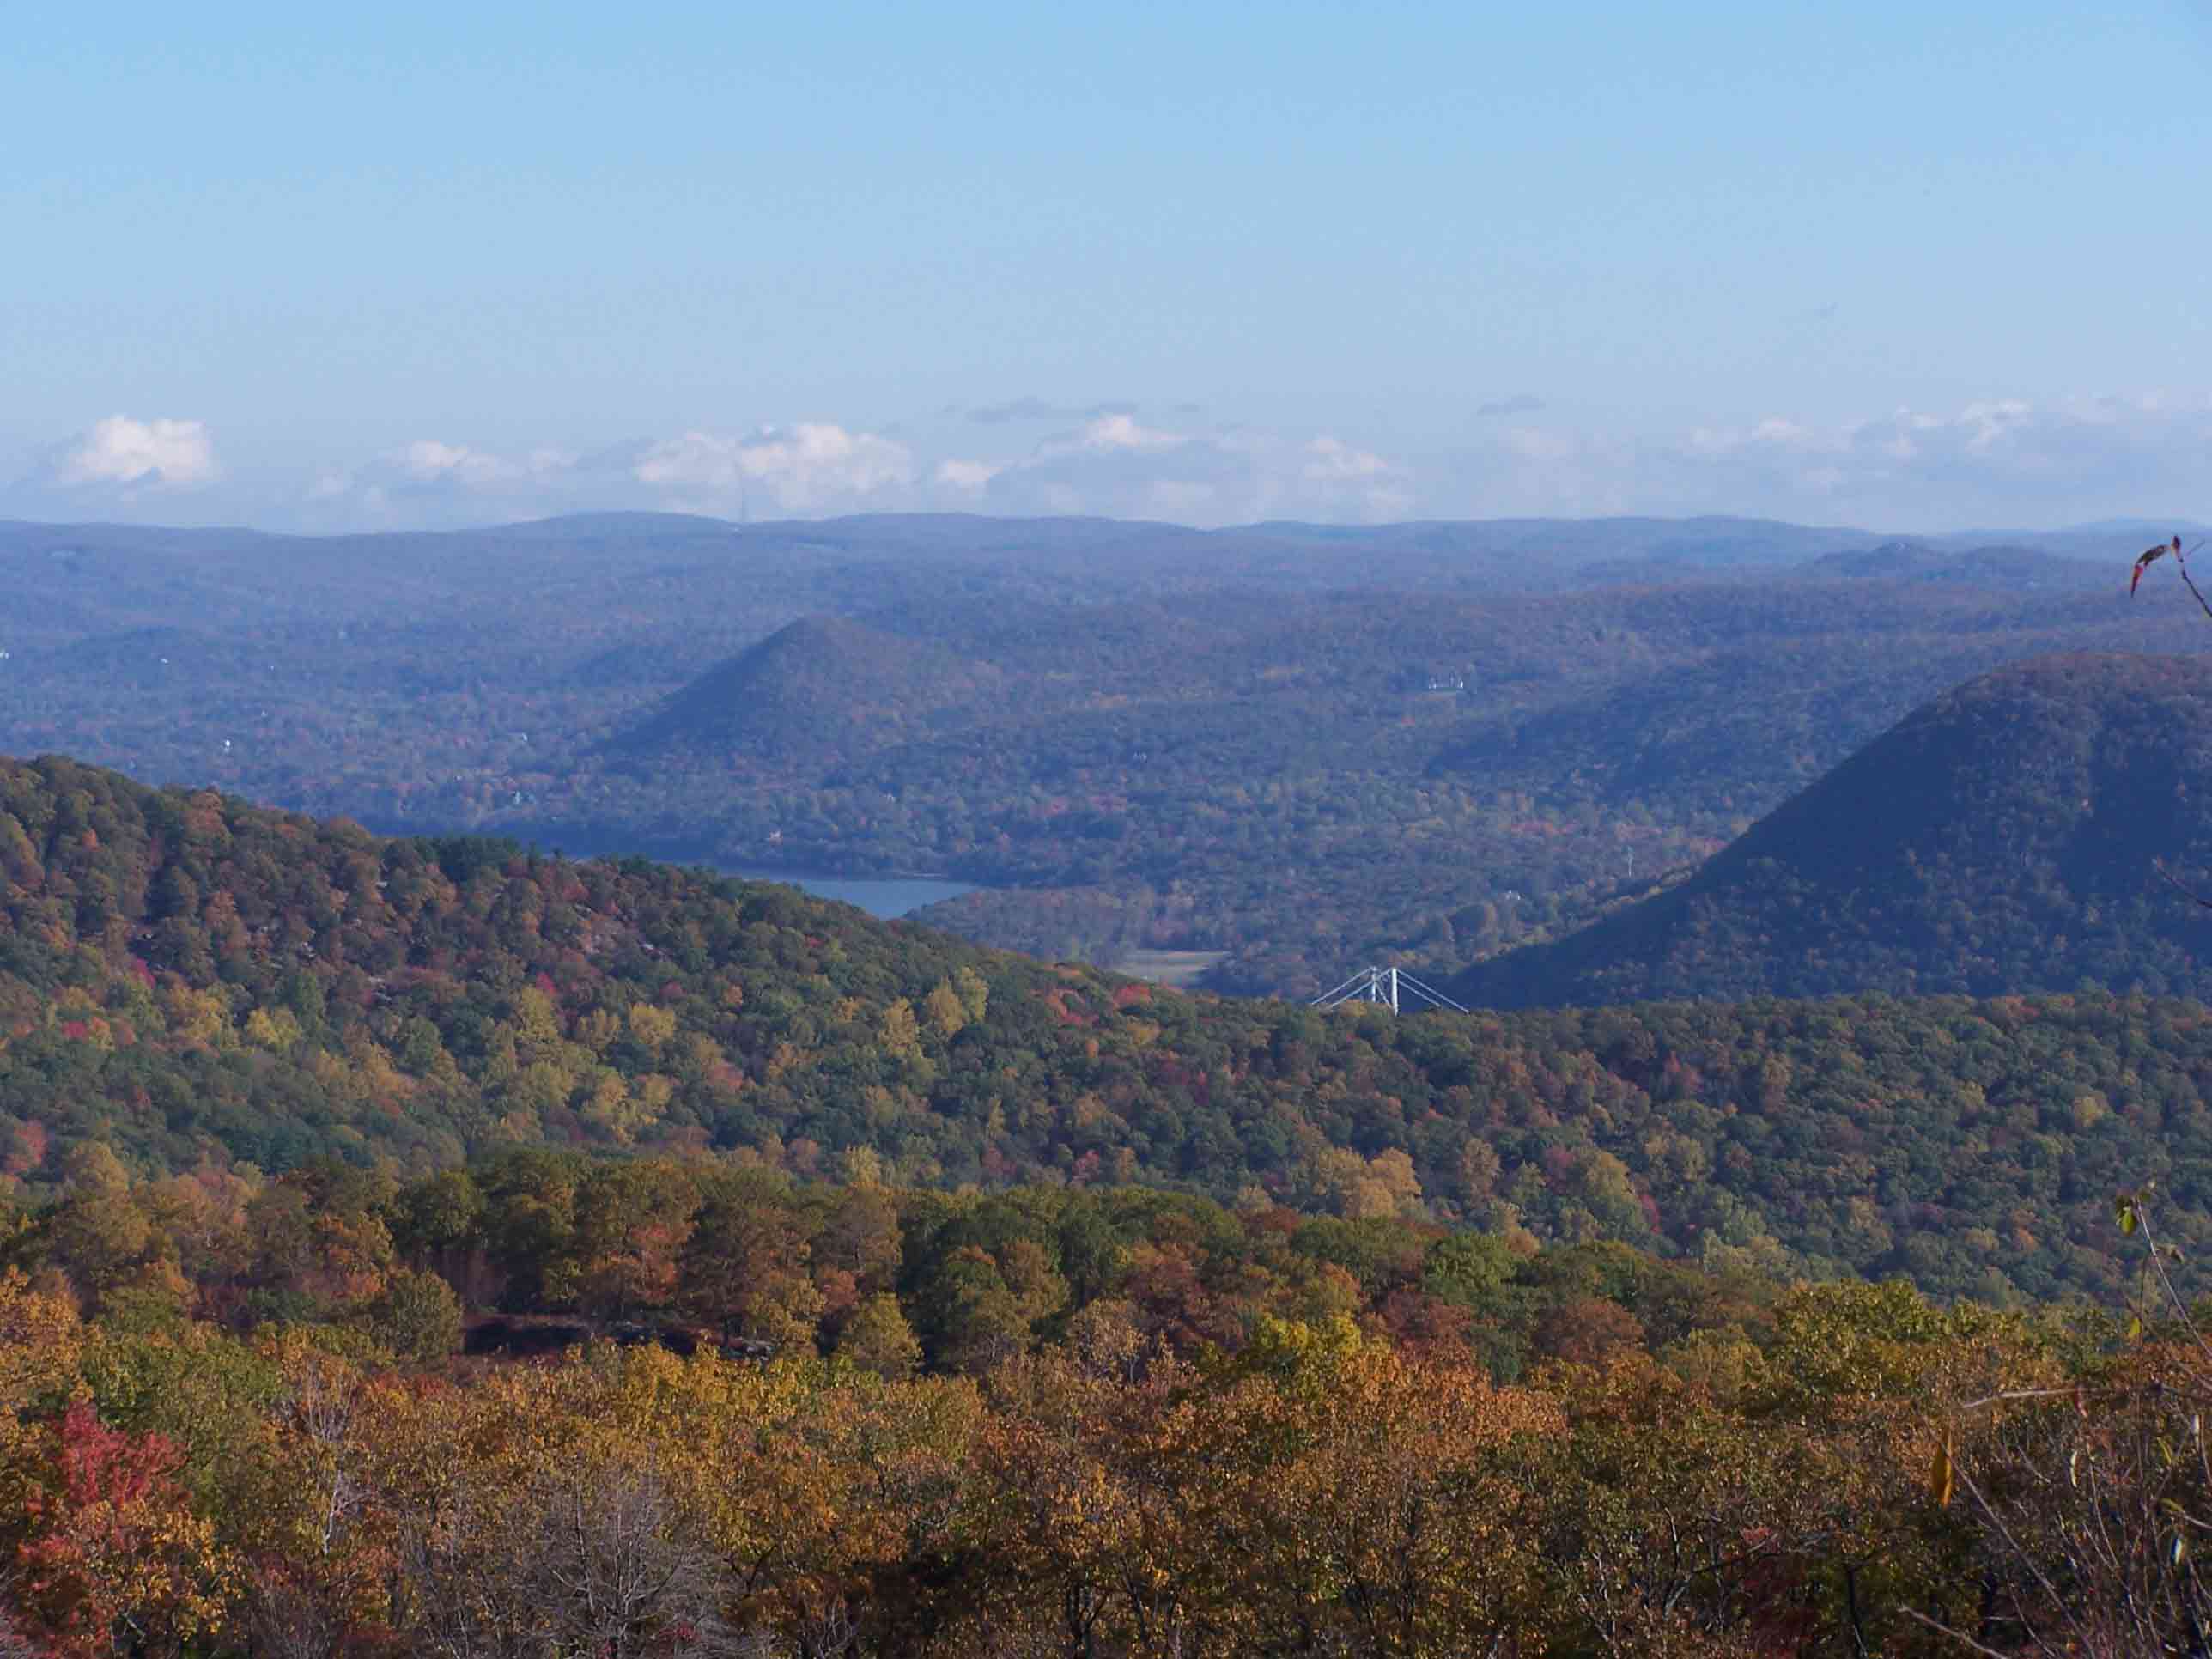 mm 6.5 View of Bear Mountain Bridge from West Mountain. Courtesy at@rohland.org